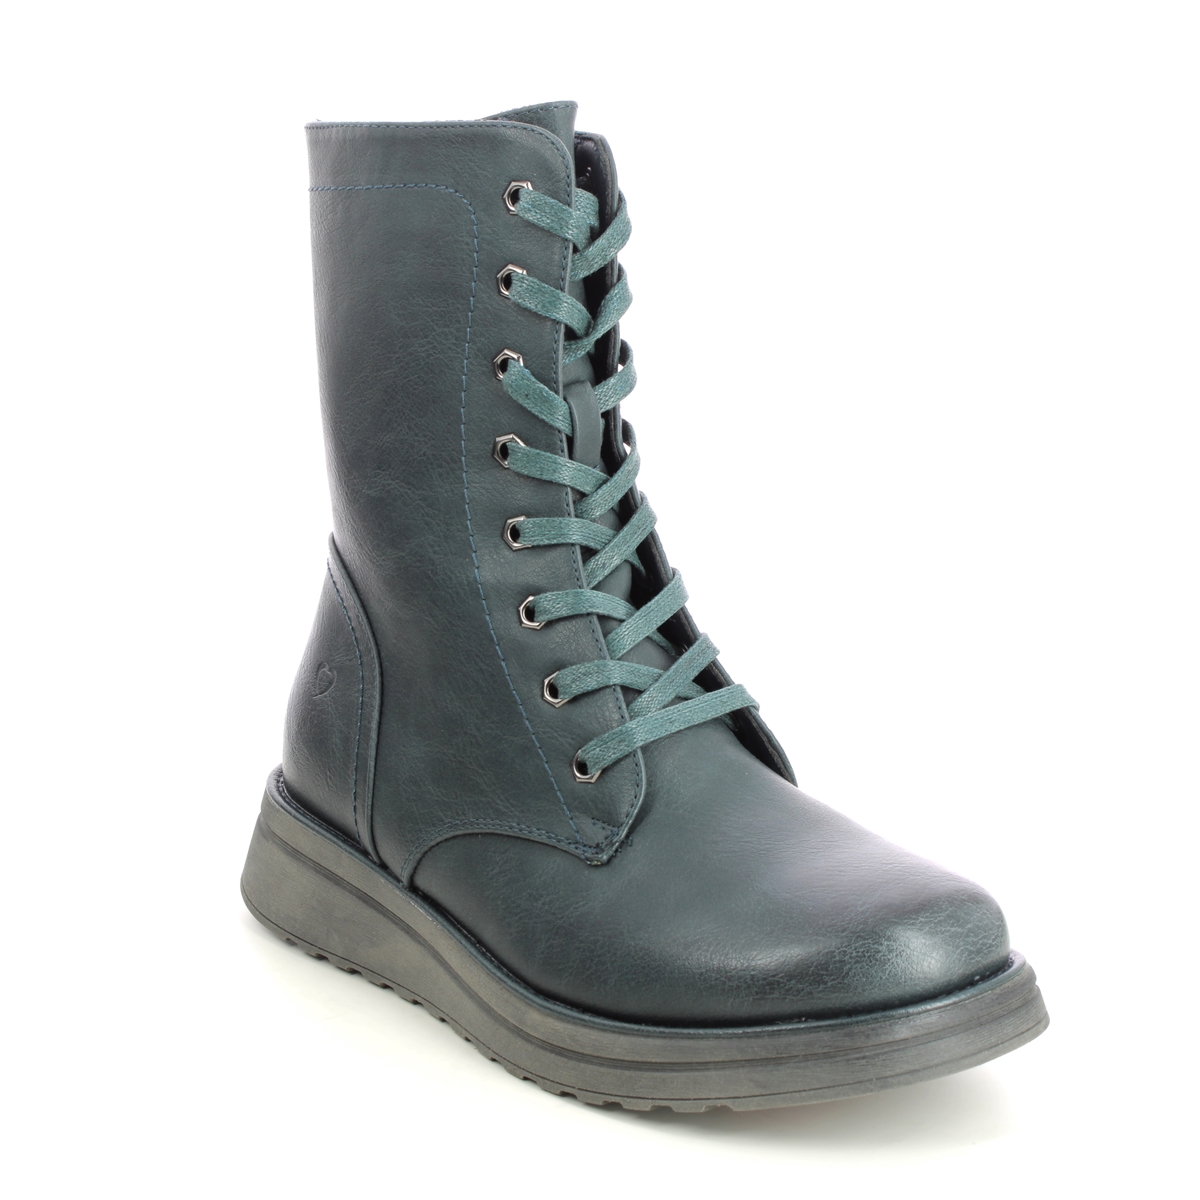 Heavenly Feet Martina Walker Teal blue Womens Lace Up Boots 3509-73 in a Plain Man-made in Size 5